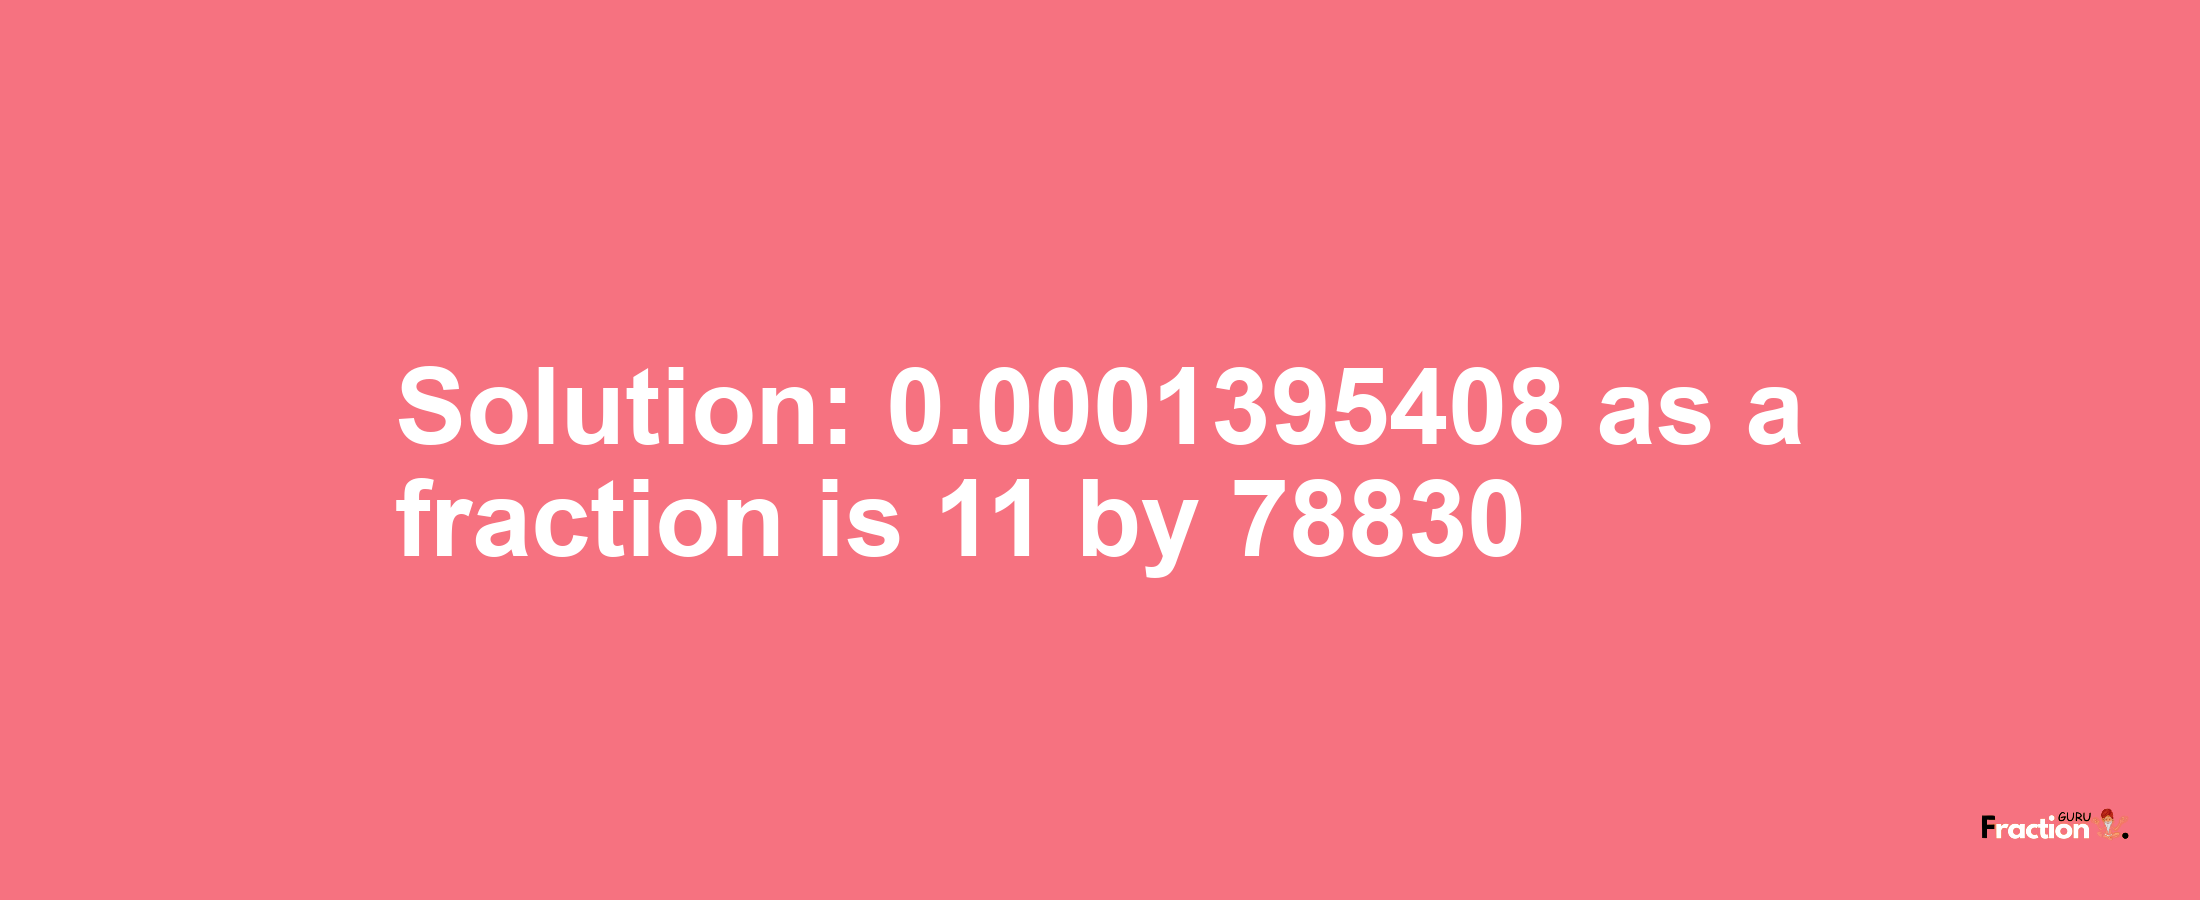 Solution:0.0001395408 as a fraction is 11/78830